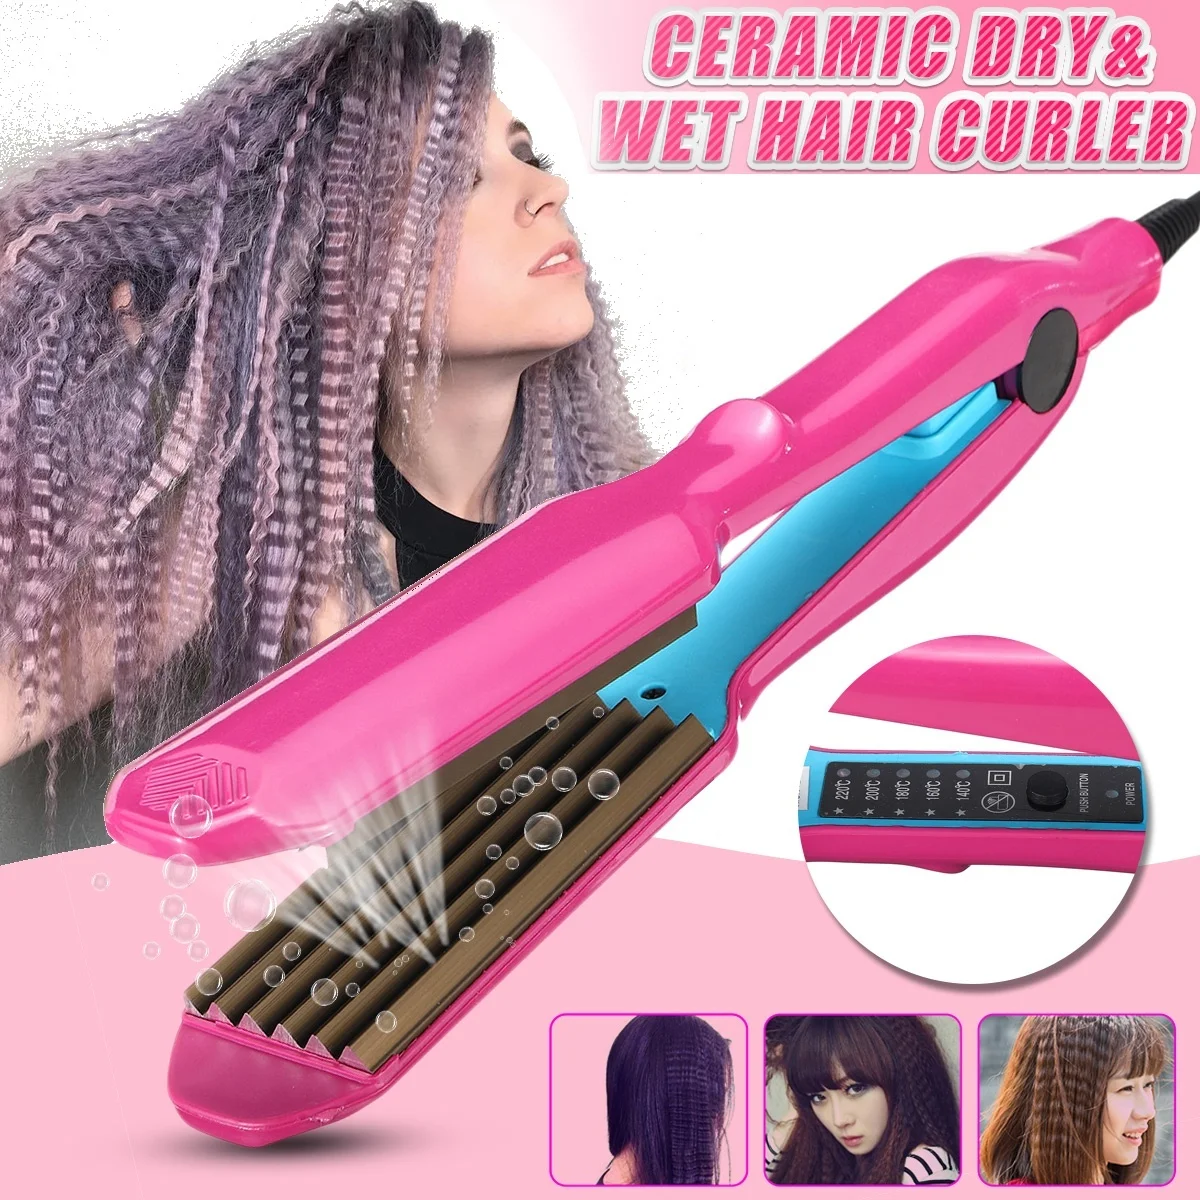 Professional Hair Crimper Curler Dry & Wet Use Corrugated Irons Ceramic  Curling Iron With Temperature Control Waving Tool - Hair Straightener -  AliExpress